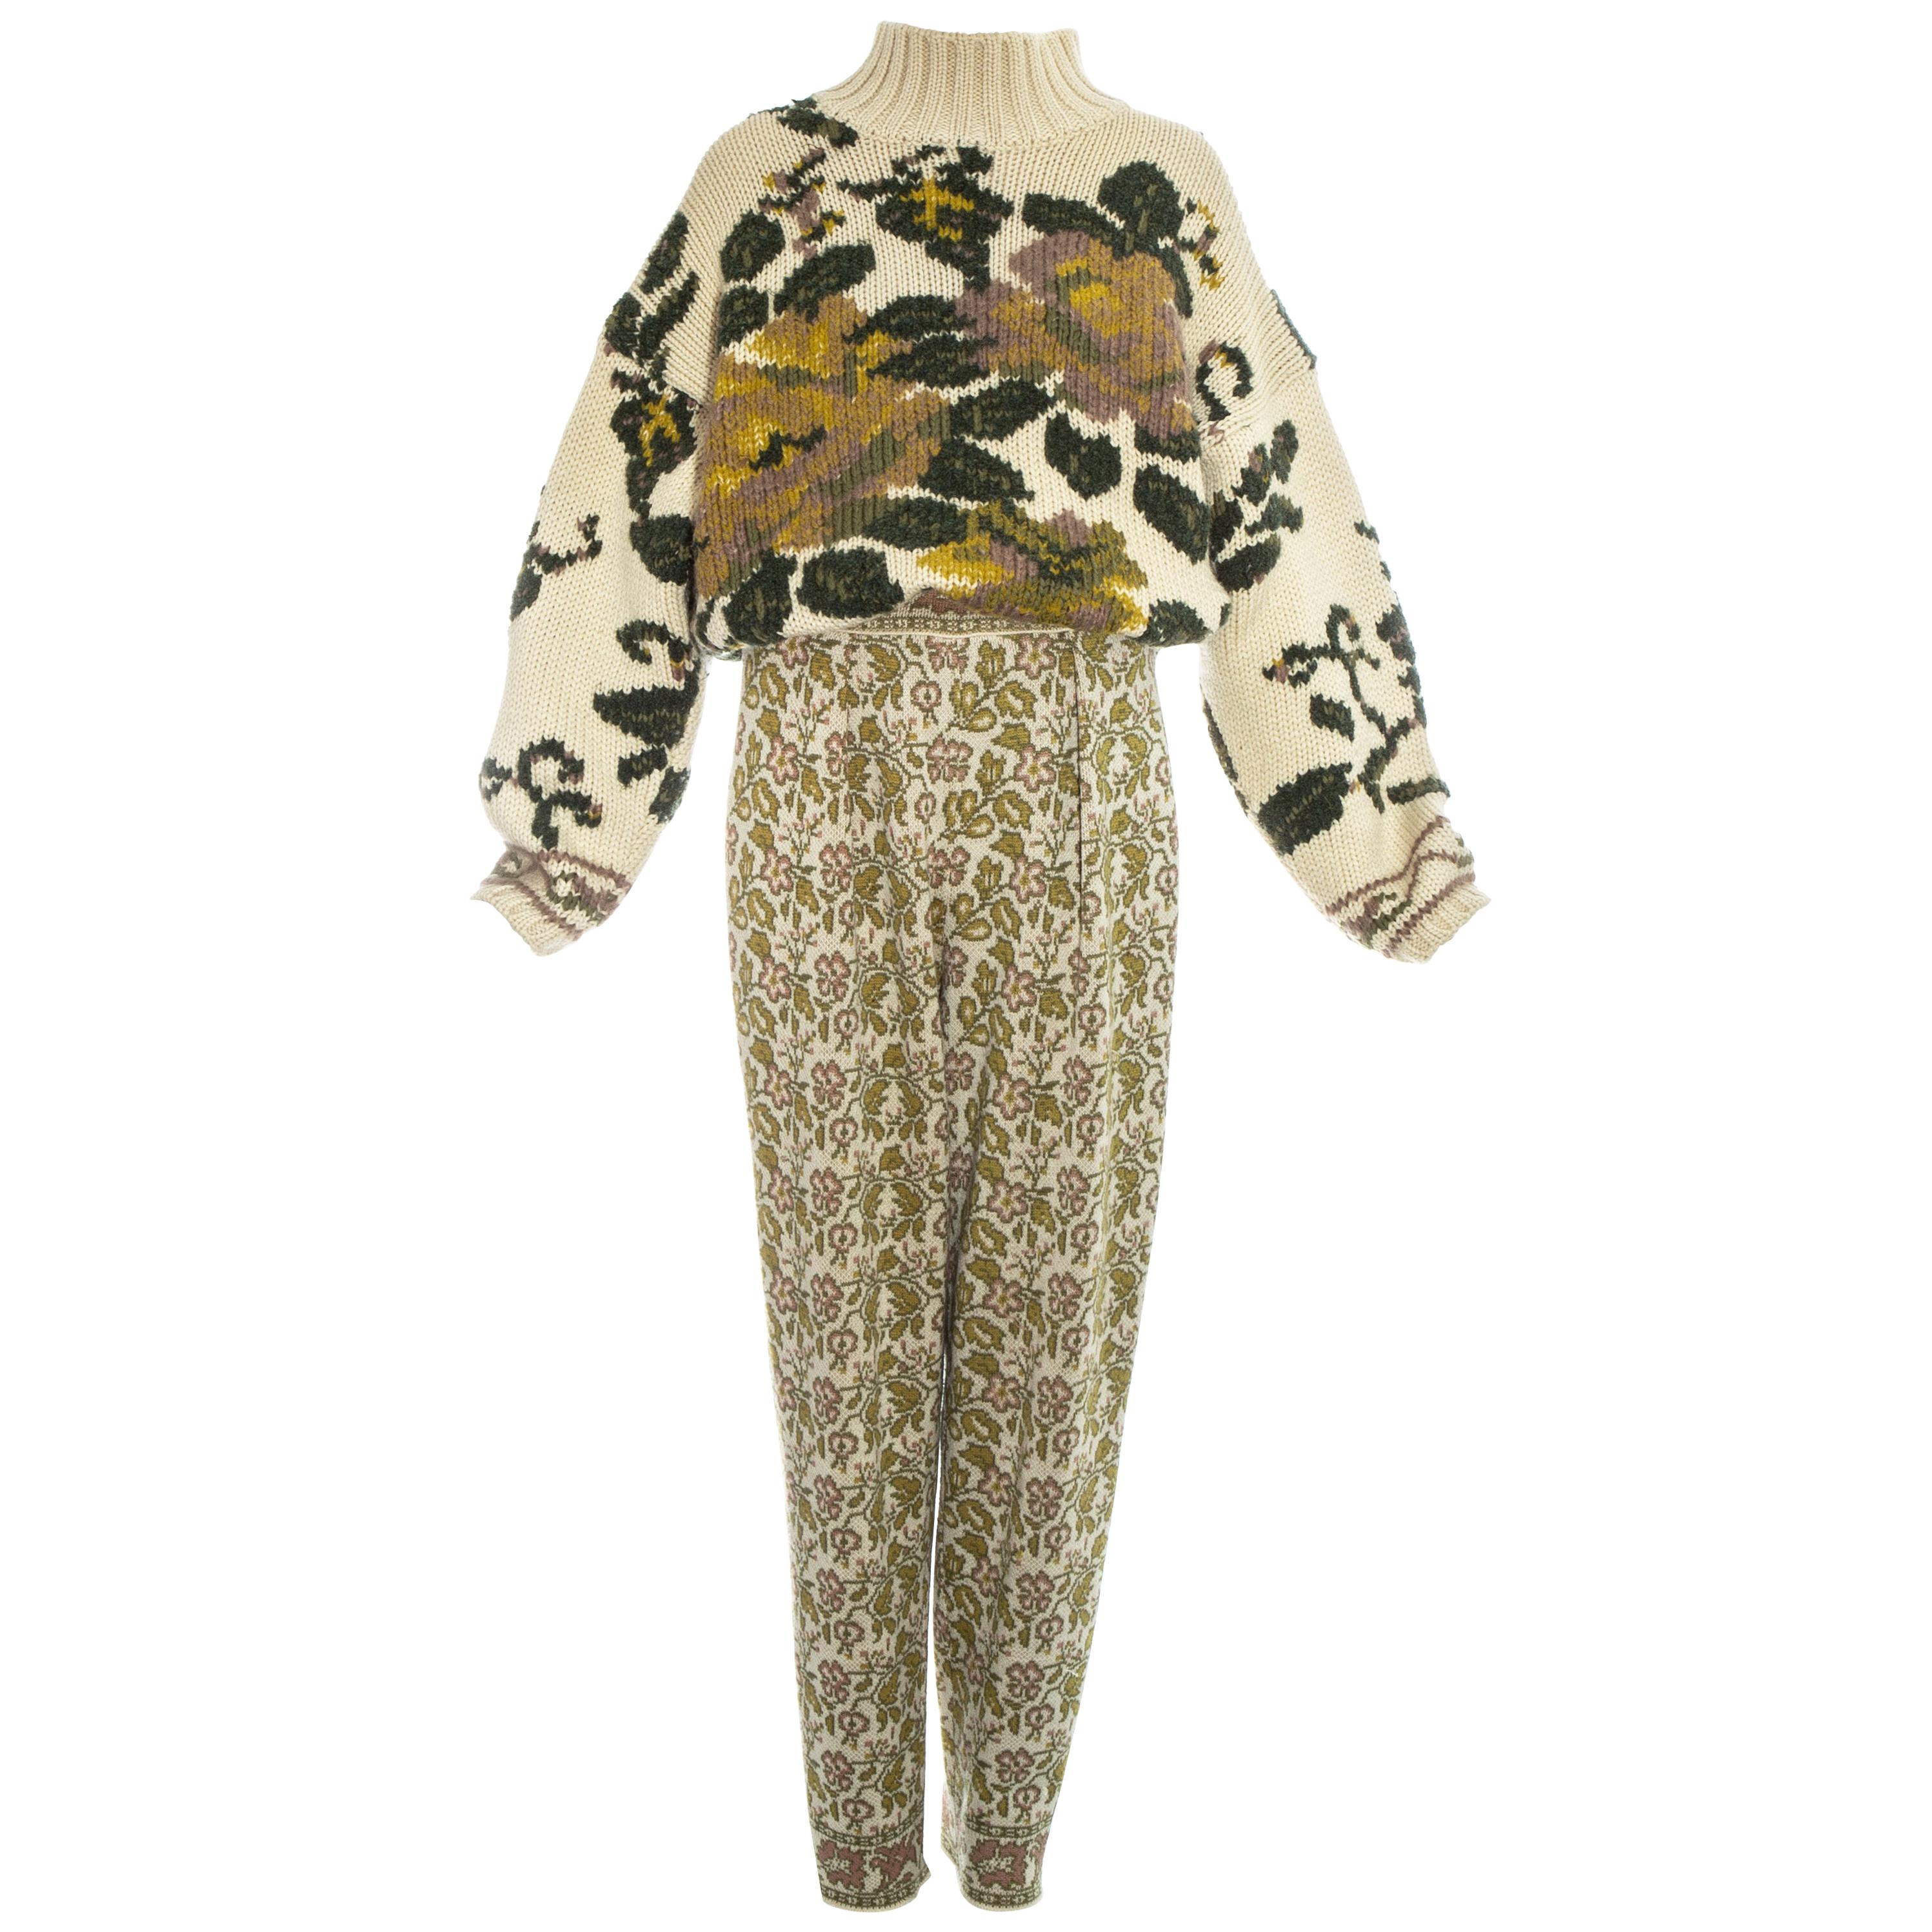 Jean Paul Gaultier knitted wool floral sweater and stirrup pants set, fw 1984